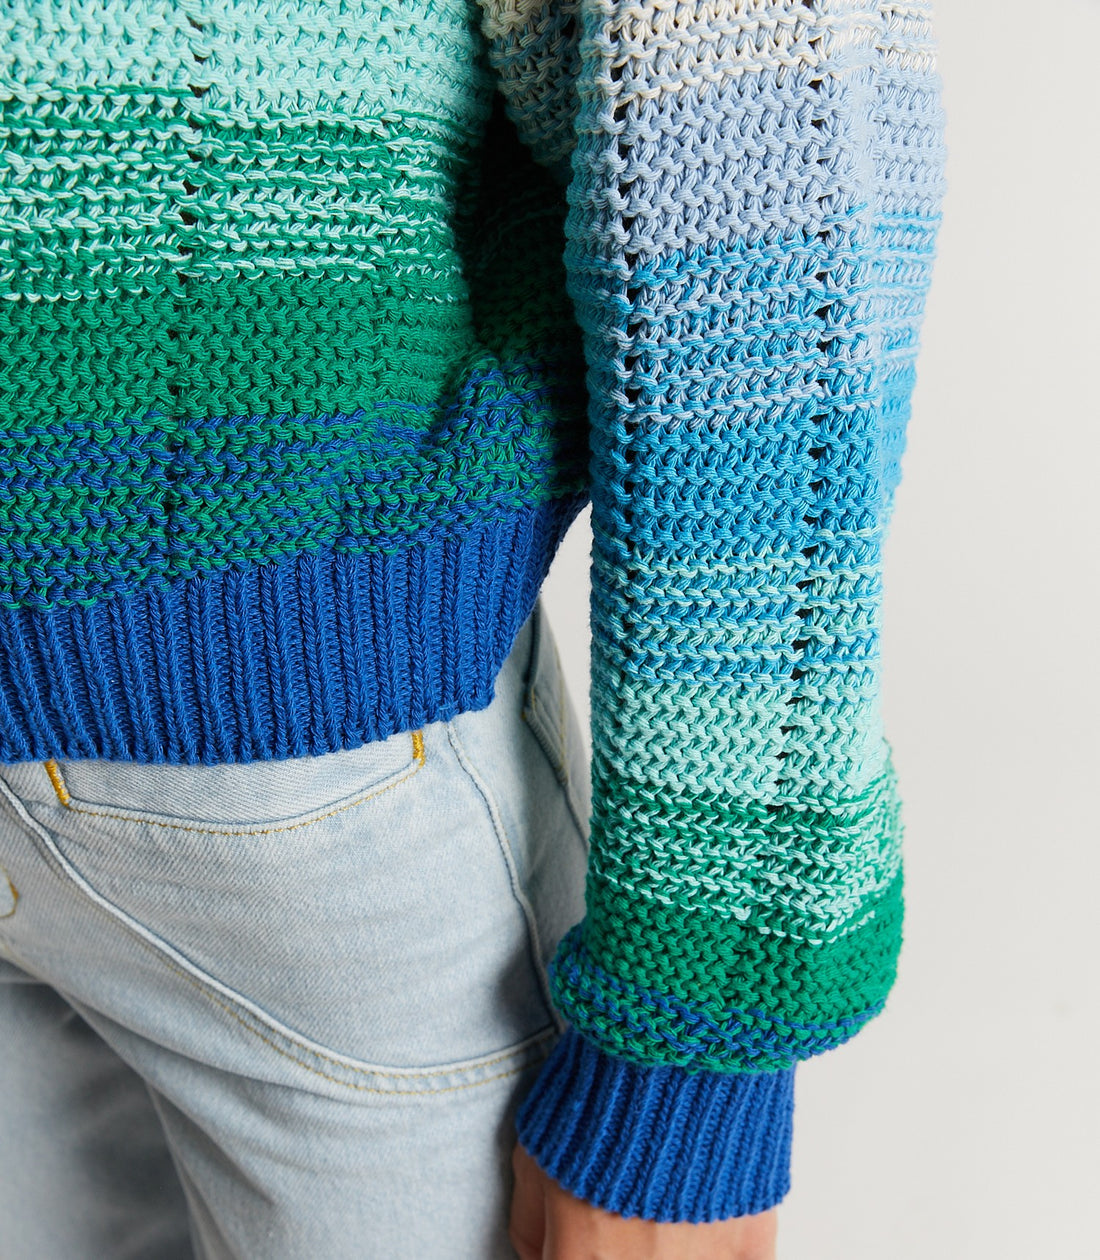 Indee Knitted Multi Sweater - Green